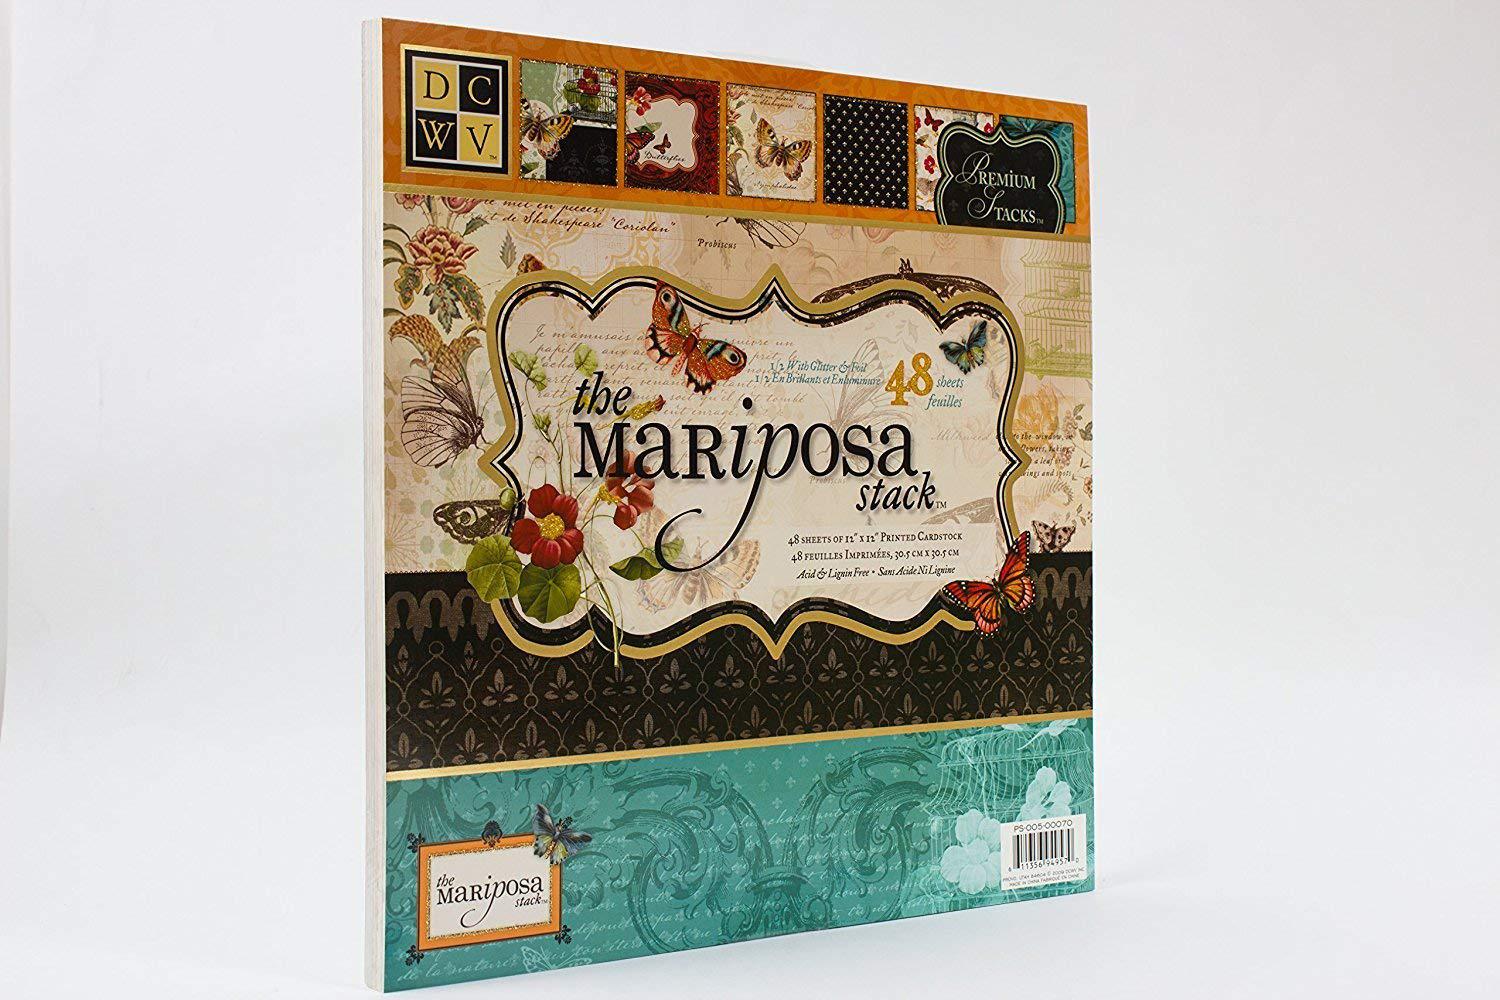 dcwv premium stacks, mariposa matstack with glitter and foil, 48 sheets, 12 x 12 inches